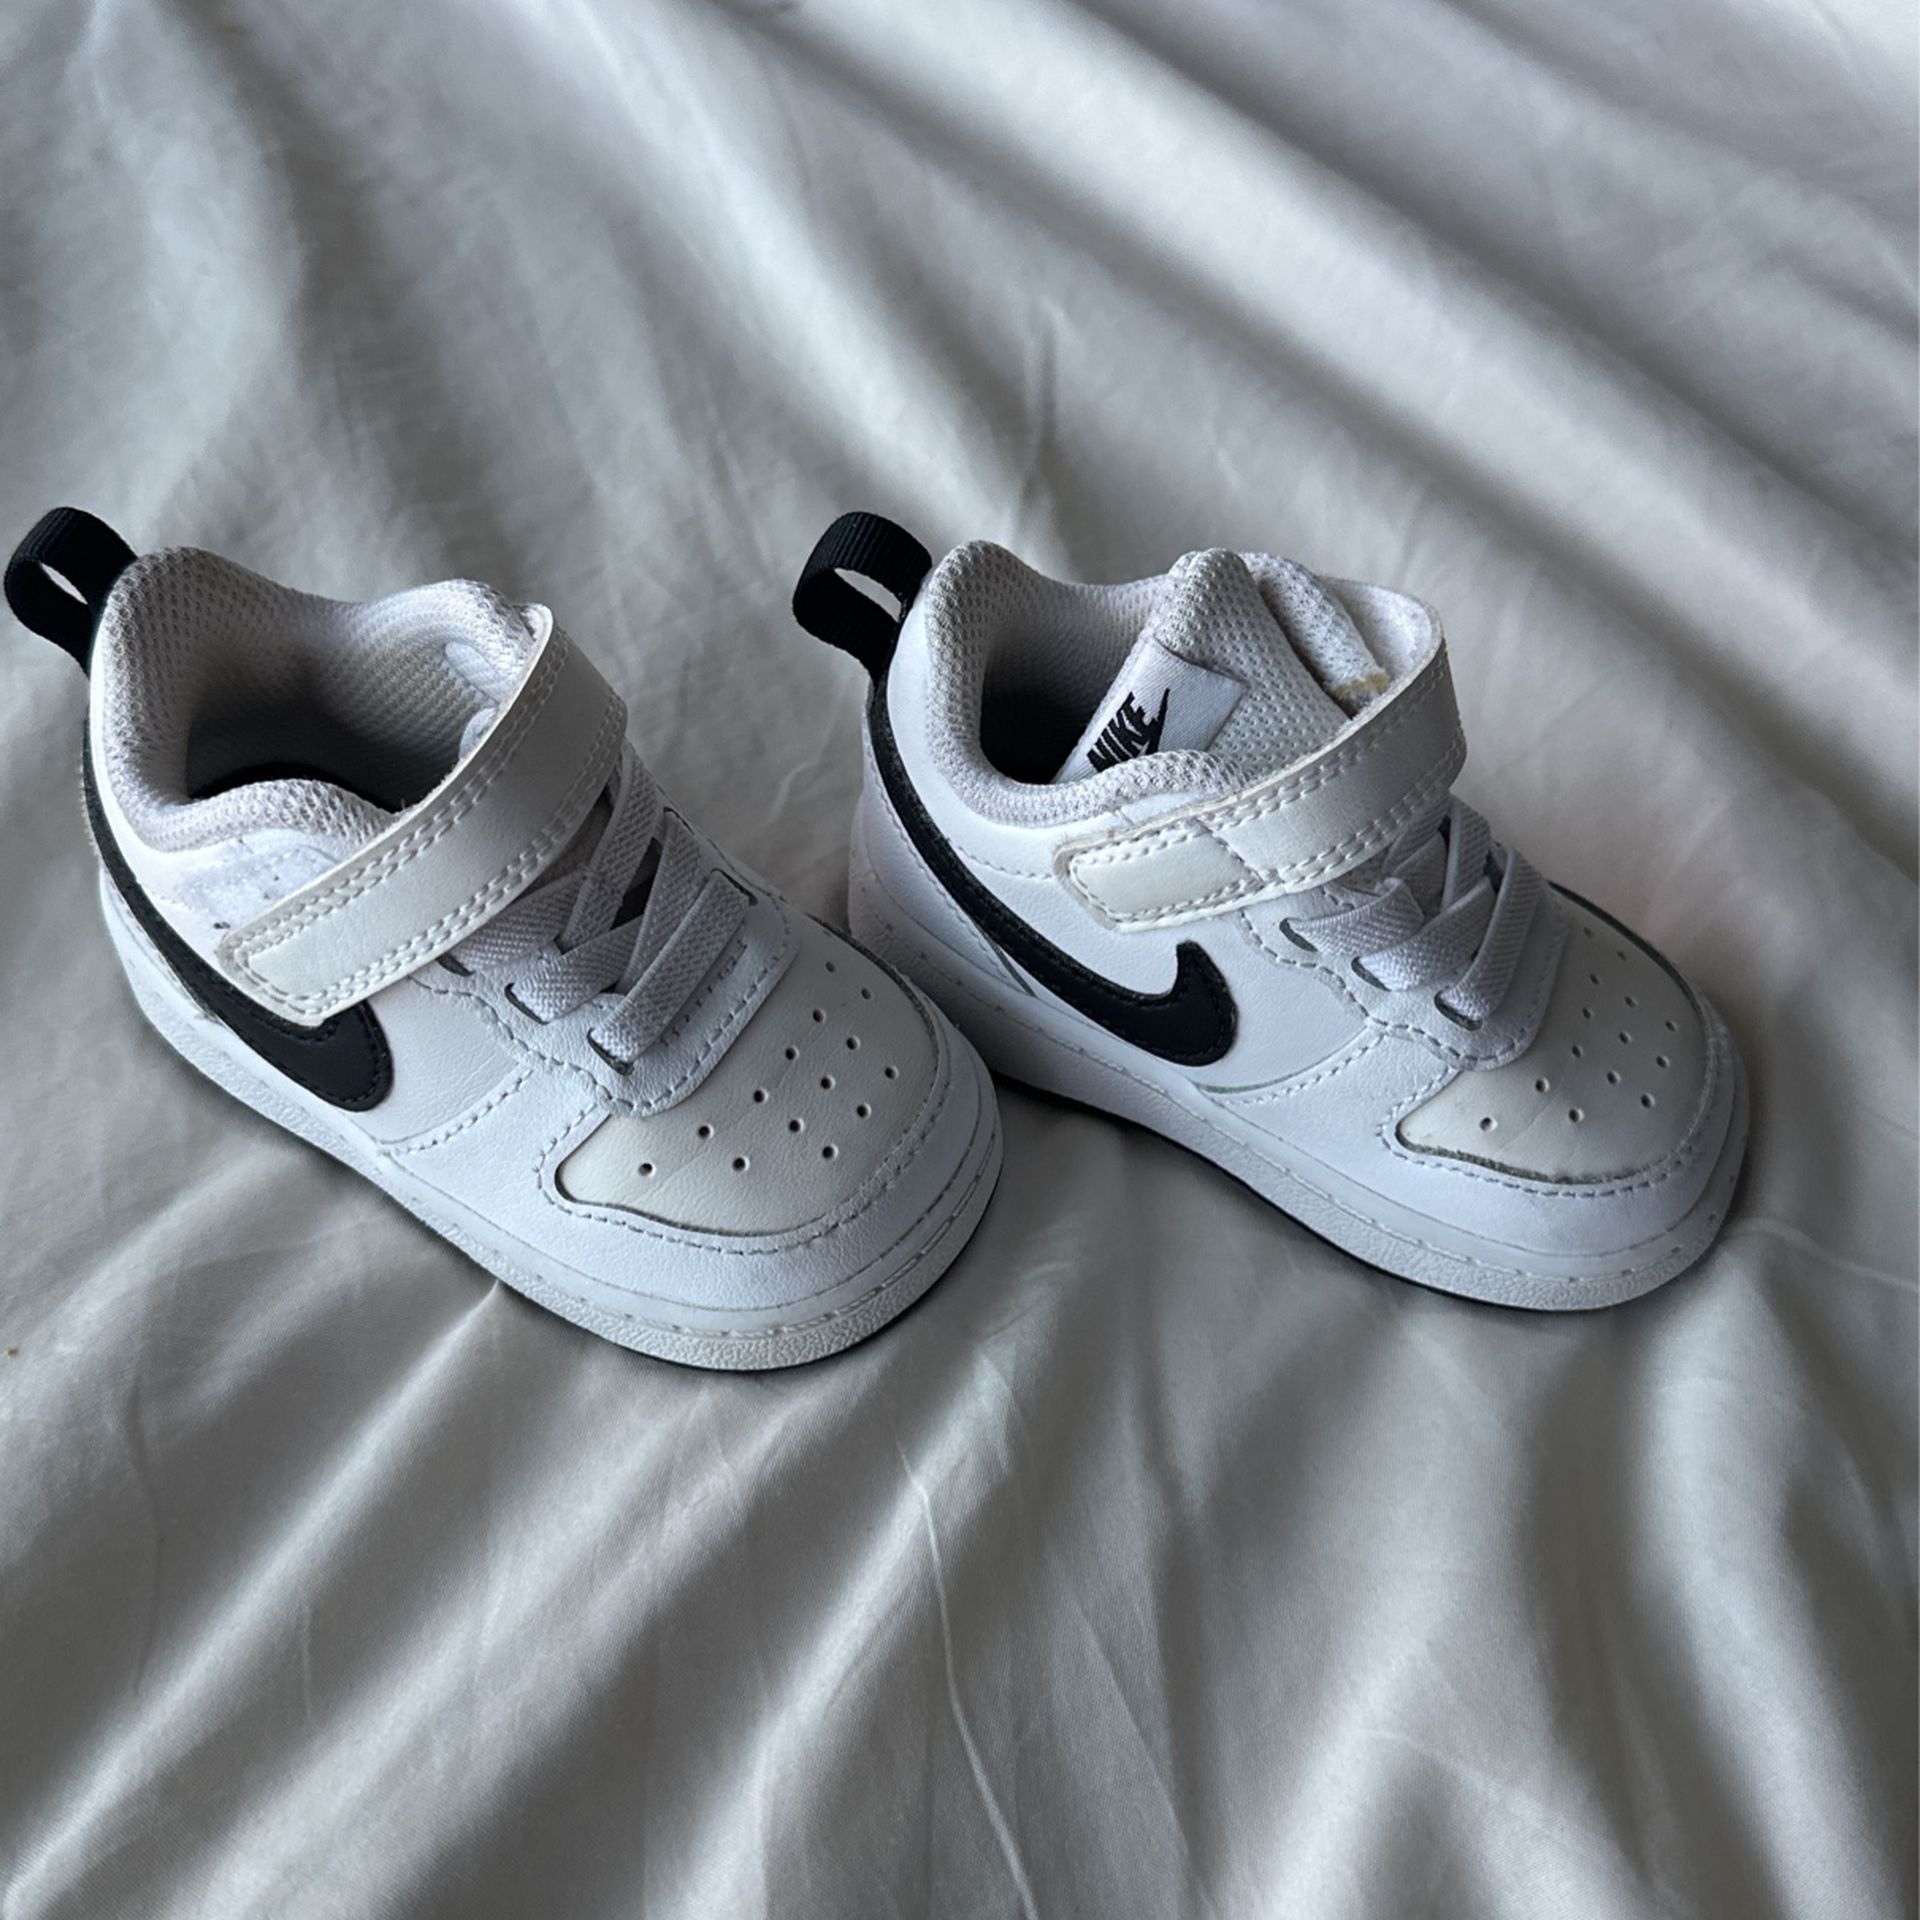 Baby Nike Shoes 4c